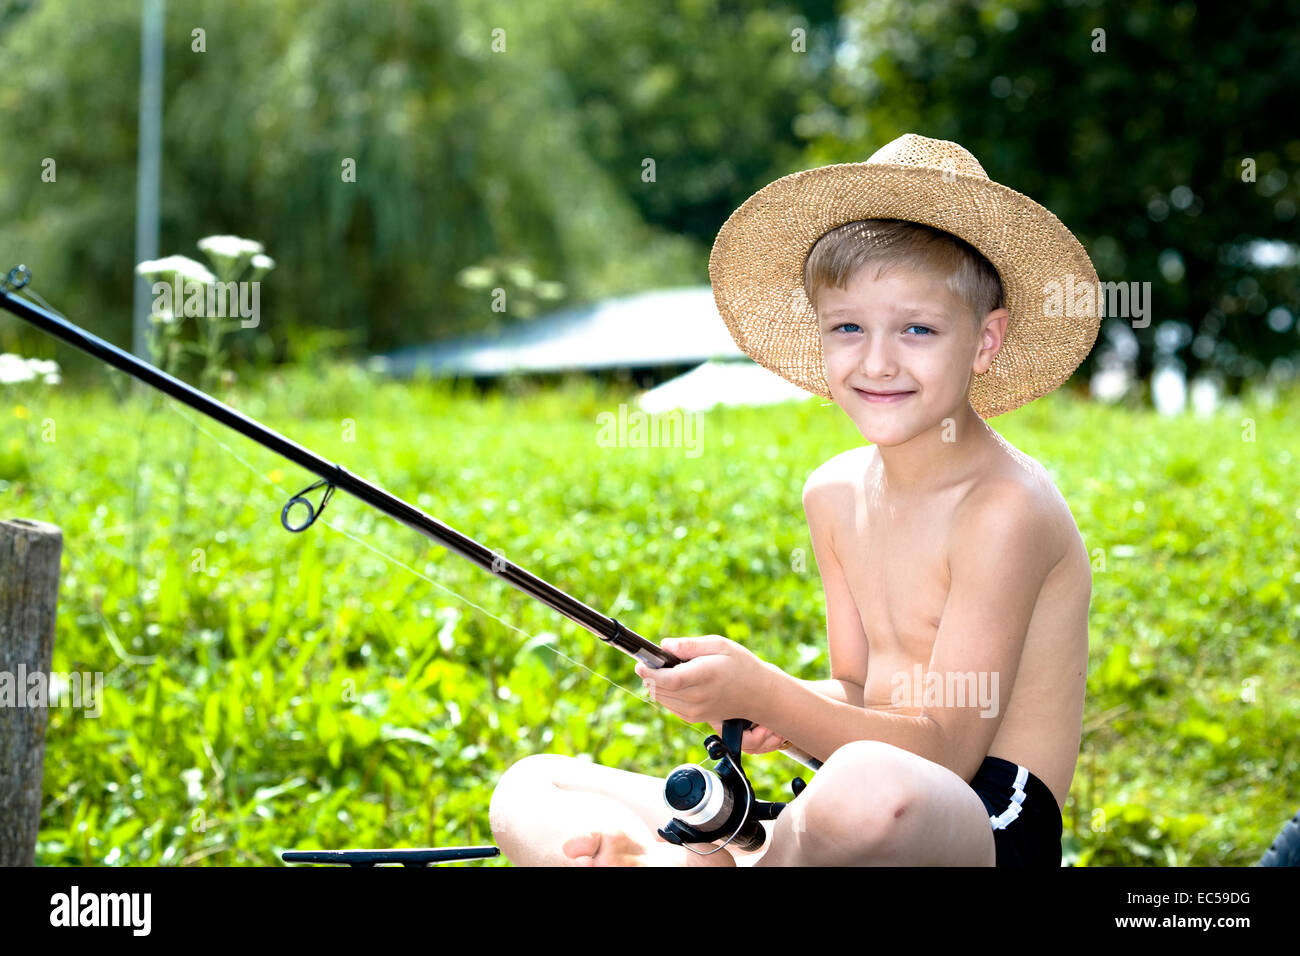 a young angler fishing in the river Stock Photo